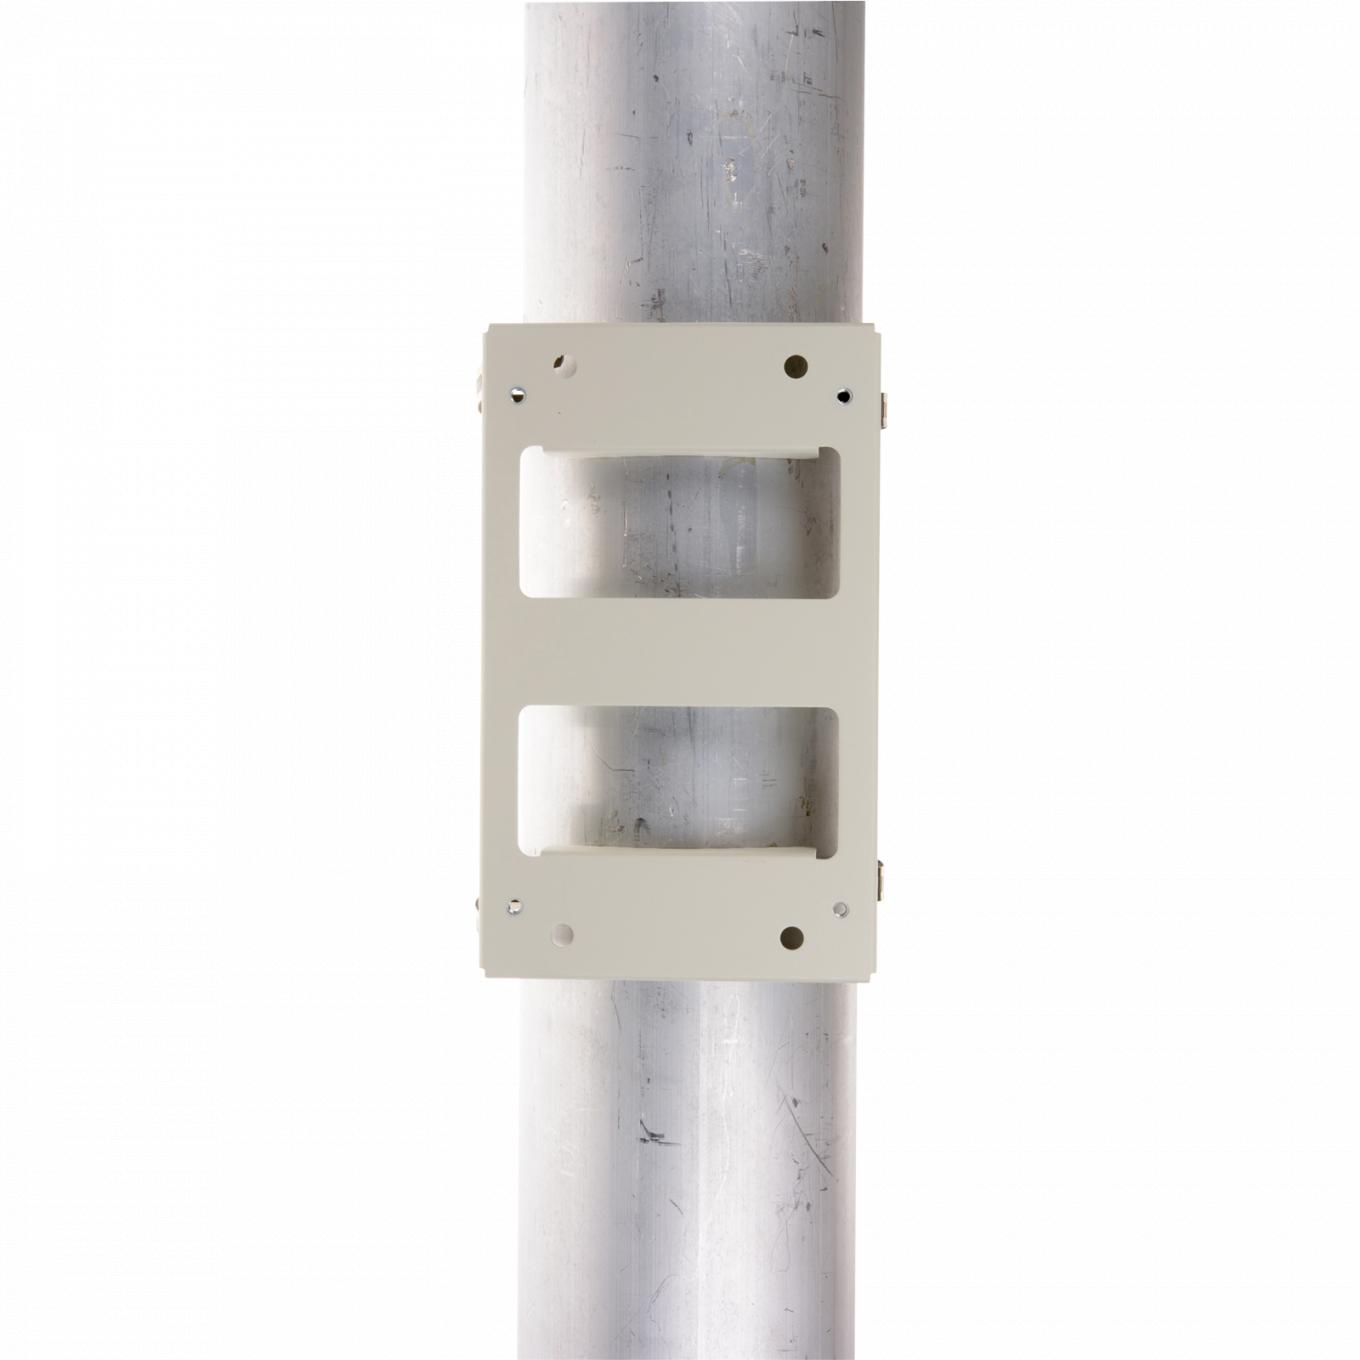 AXIS TD9301 Outdoor Midspan Pole mount, viewed from its front. 